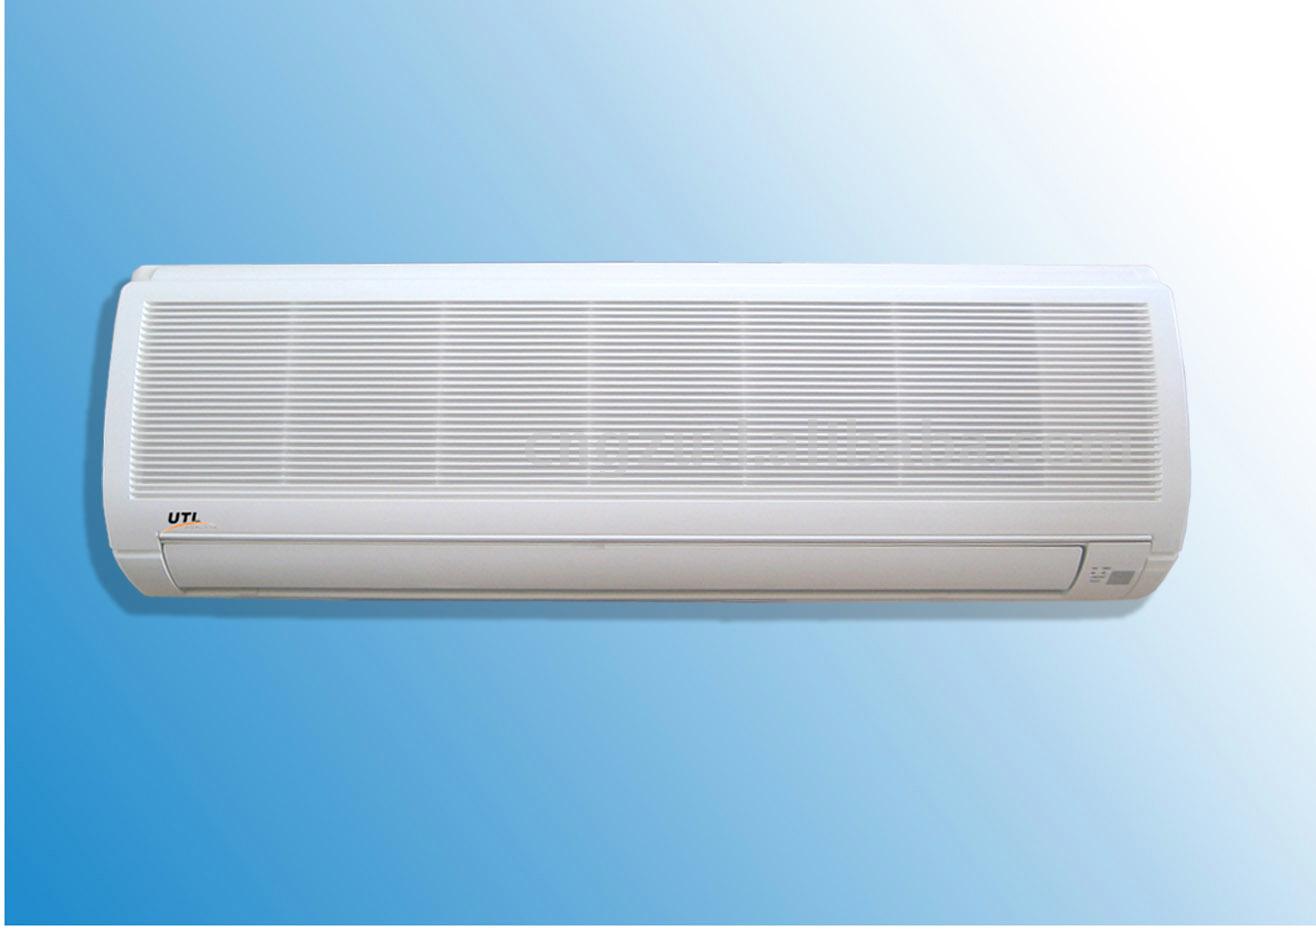 air conditioner wallpaper,emergency light,technology,rectangle,electronic device,filter